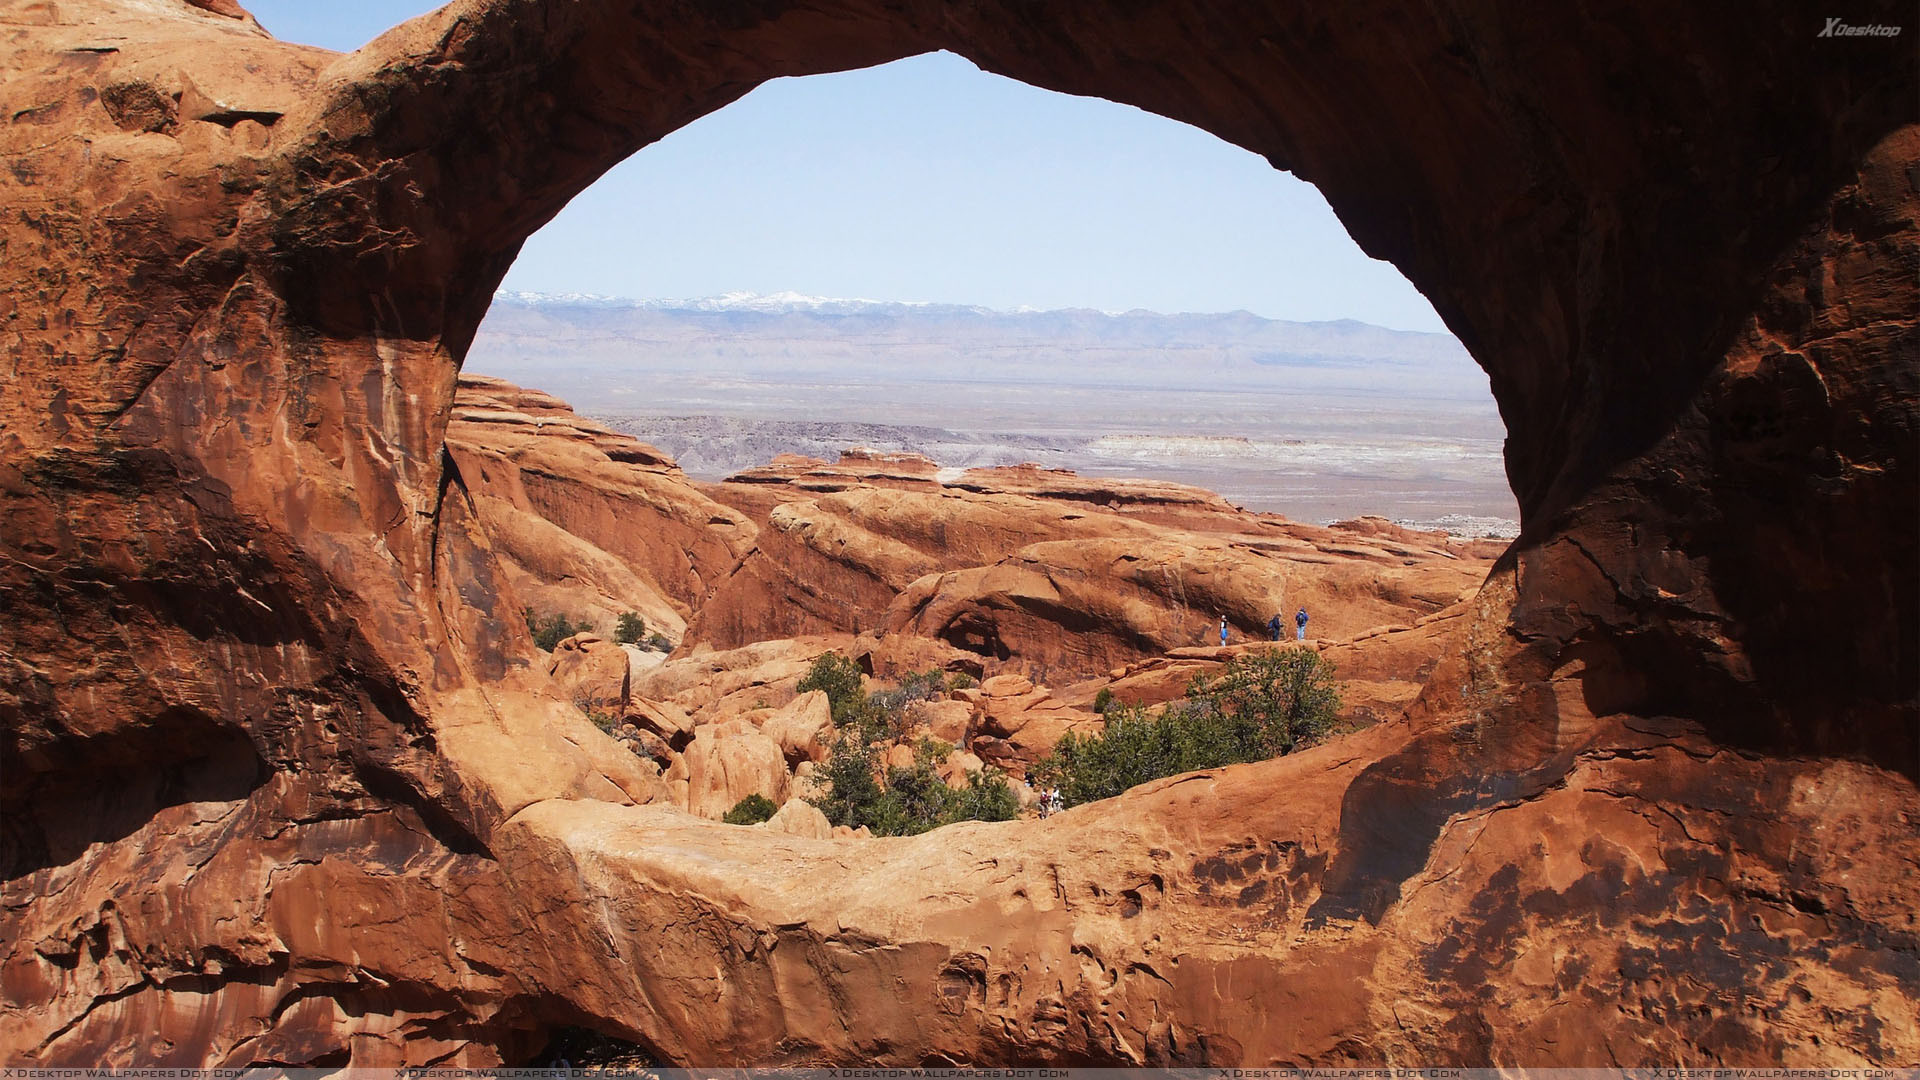 1920x1080 You are viewing wallpaper titled "Arches National Park ...